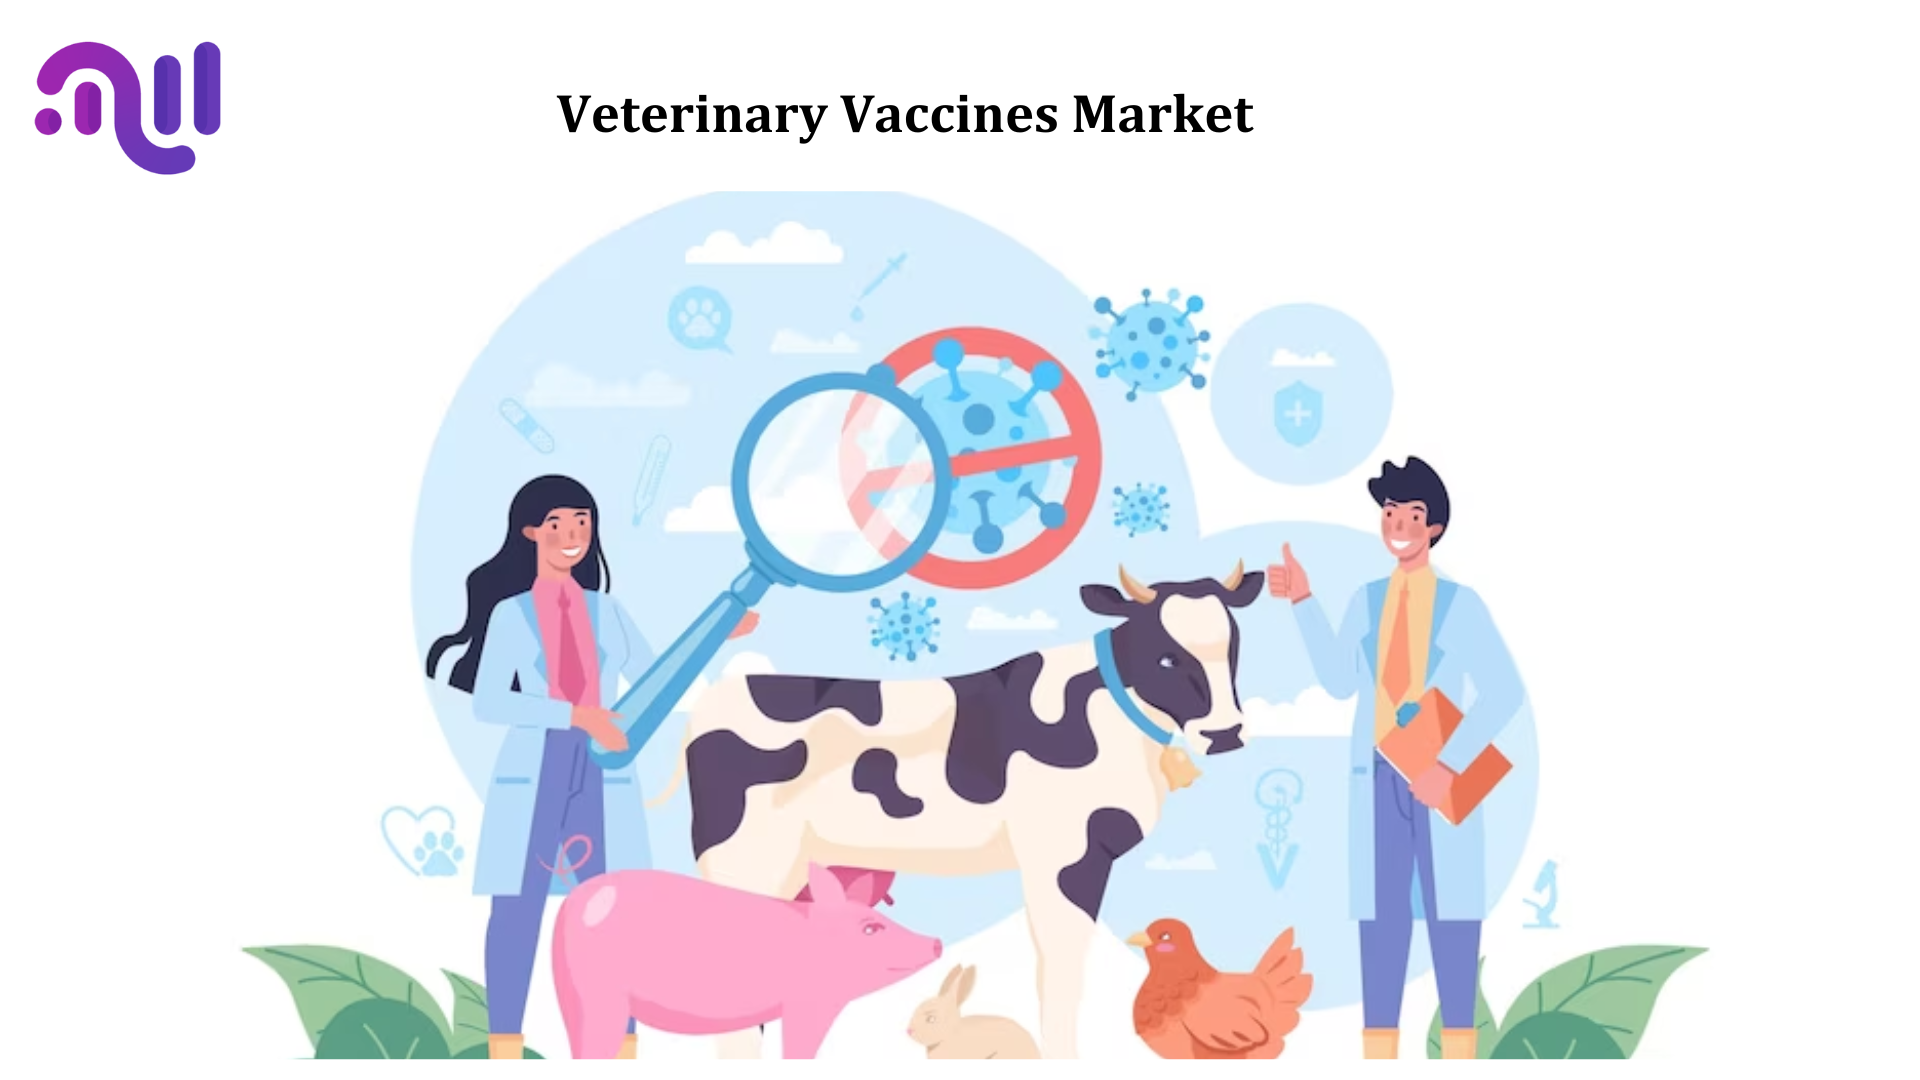 Veterinary Vaccines Market Predicted To Reach USD 22.1 Bn In Revenues By 2032 With a 7.2% CAGR.